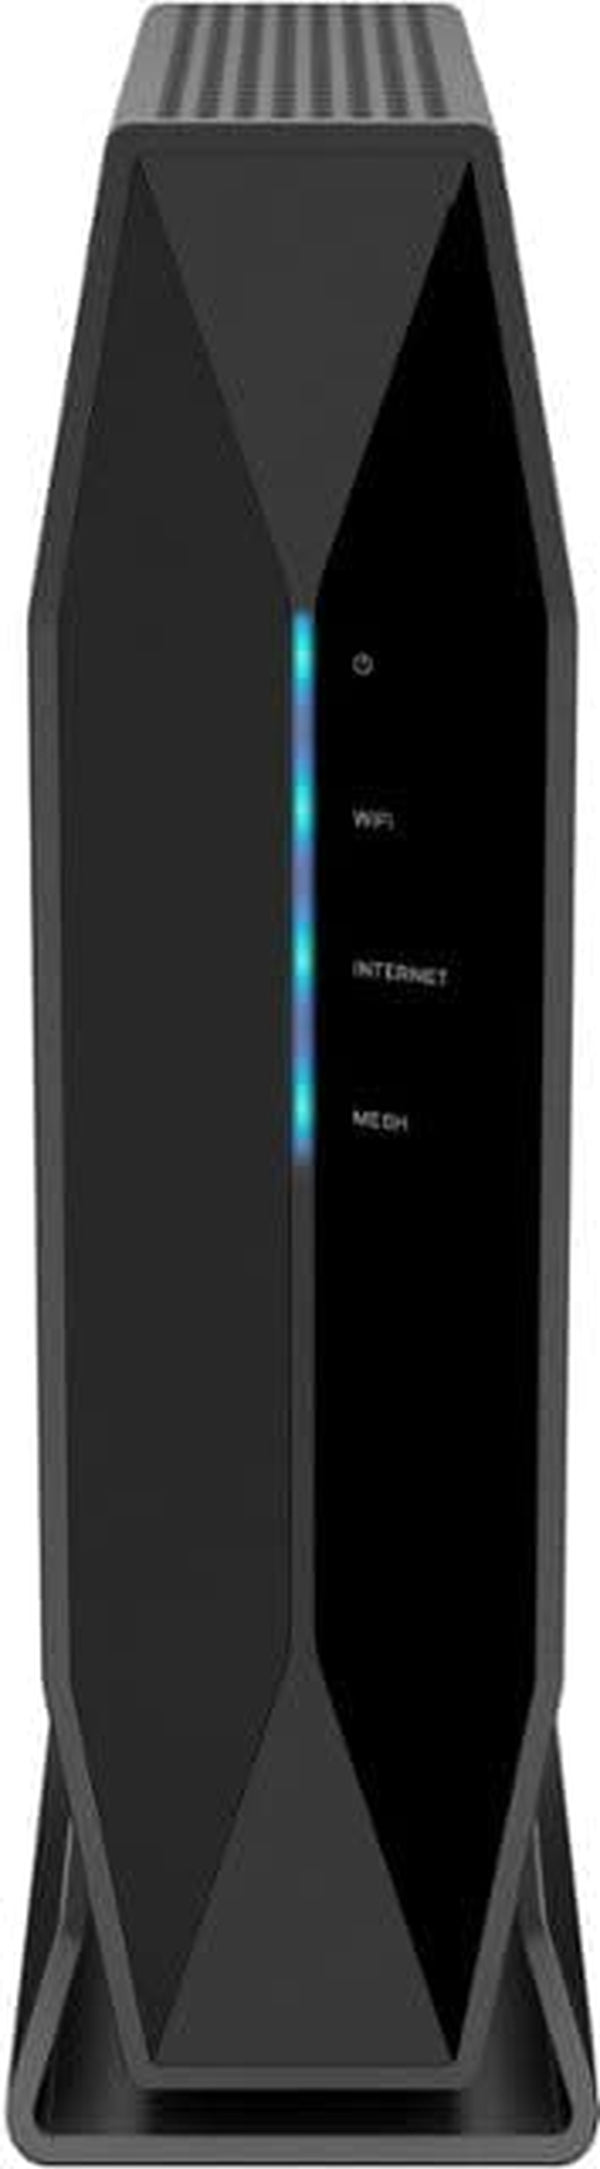 E8451 AX3200 Wifi 6 Router: Dual-Band Wireless Home Network 4 Gigabit Ethernet Ports, Parental Controls, 3.2 Gbps, 2,500 Sq Ft, 25 Devices